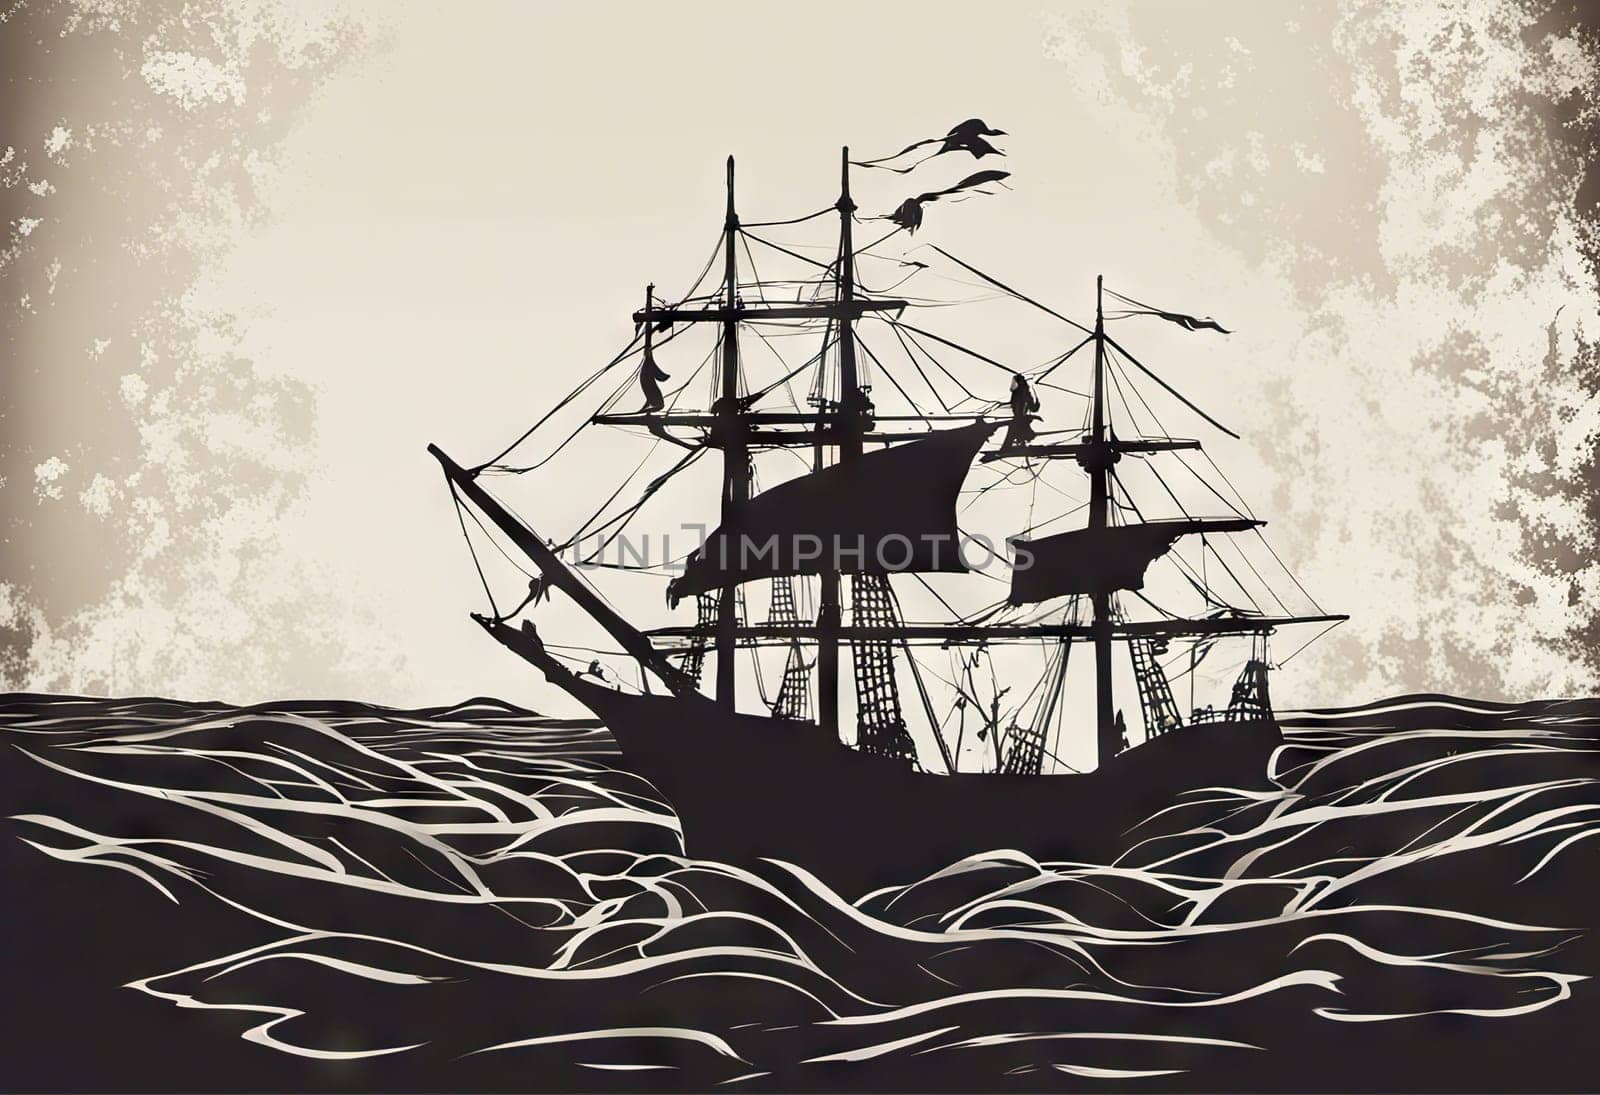 Happy Columbus Day banner with ship, illustration.